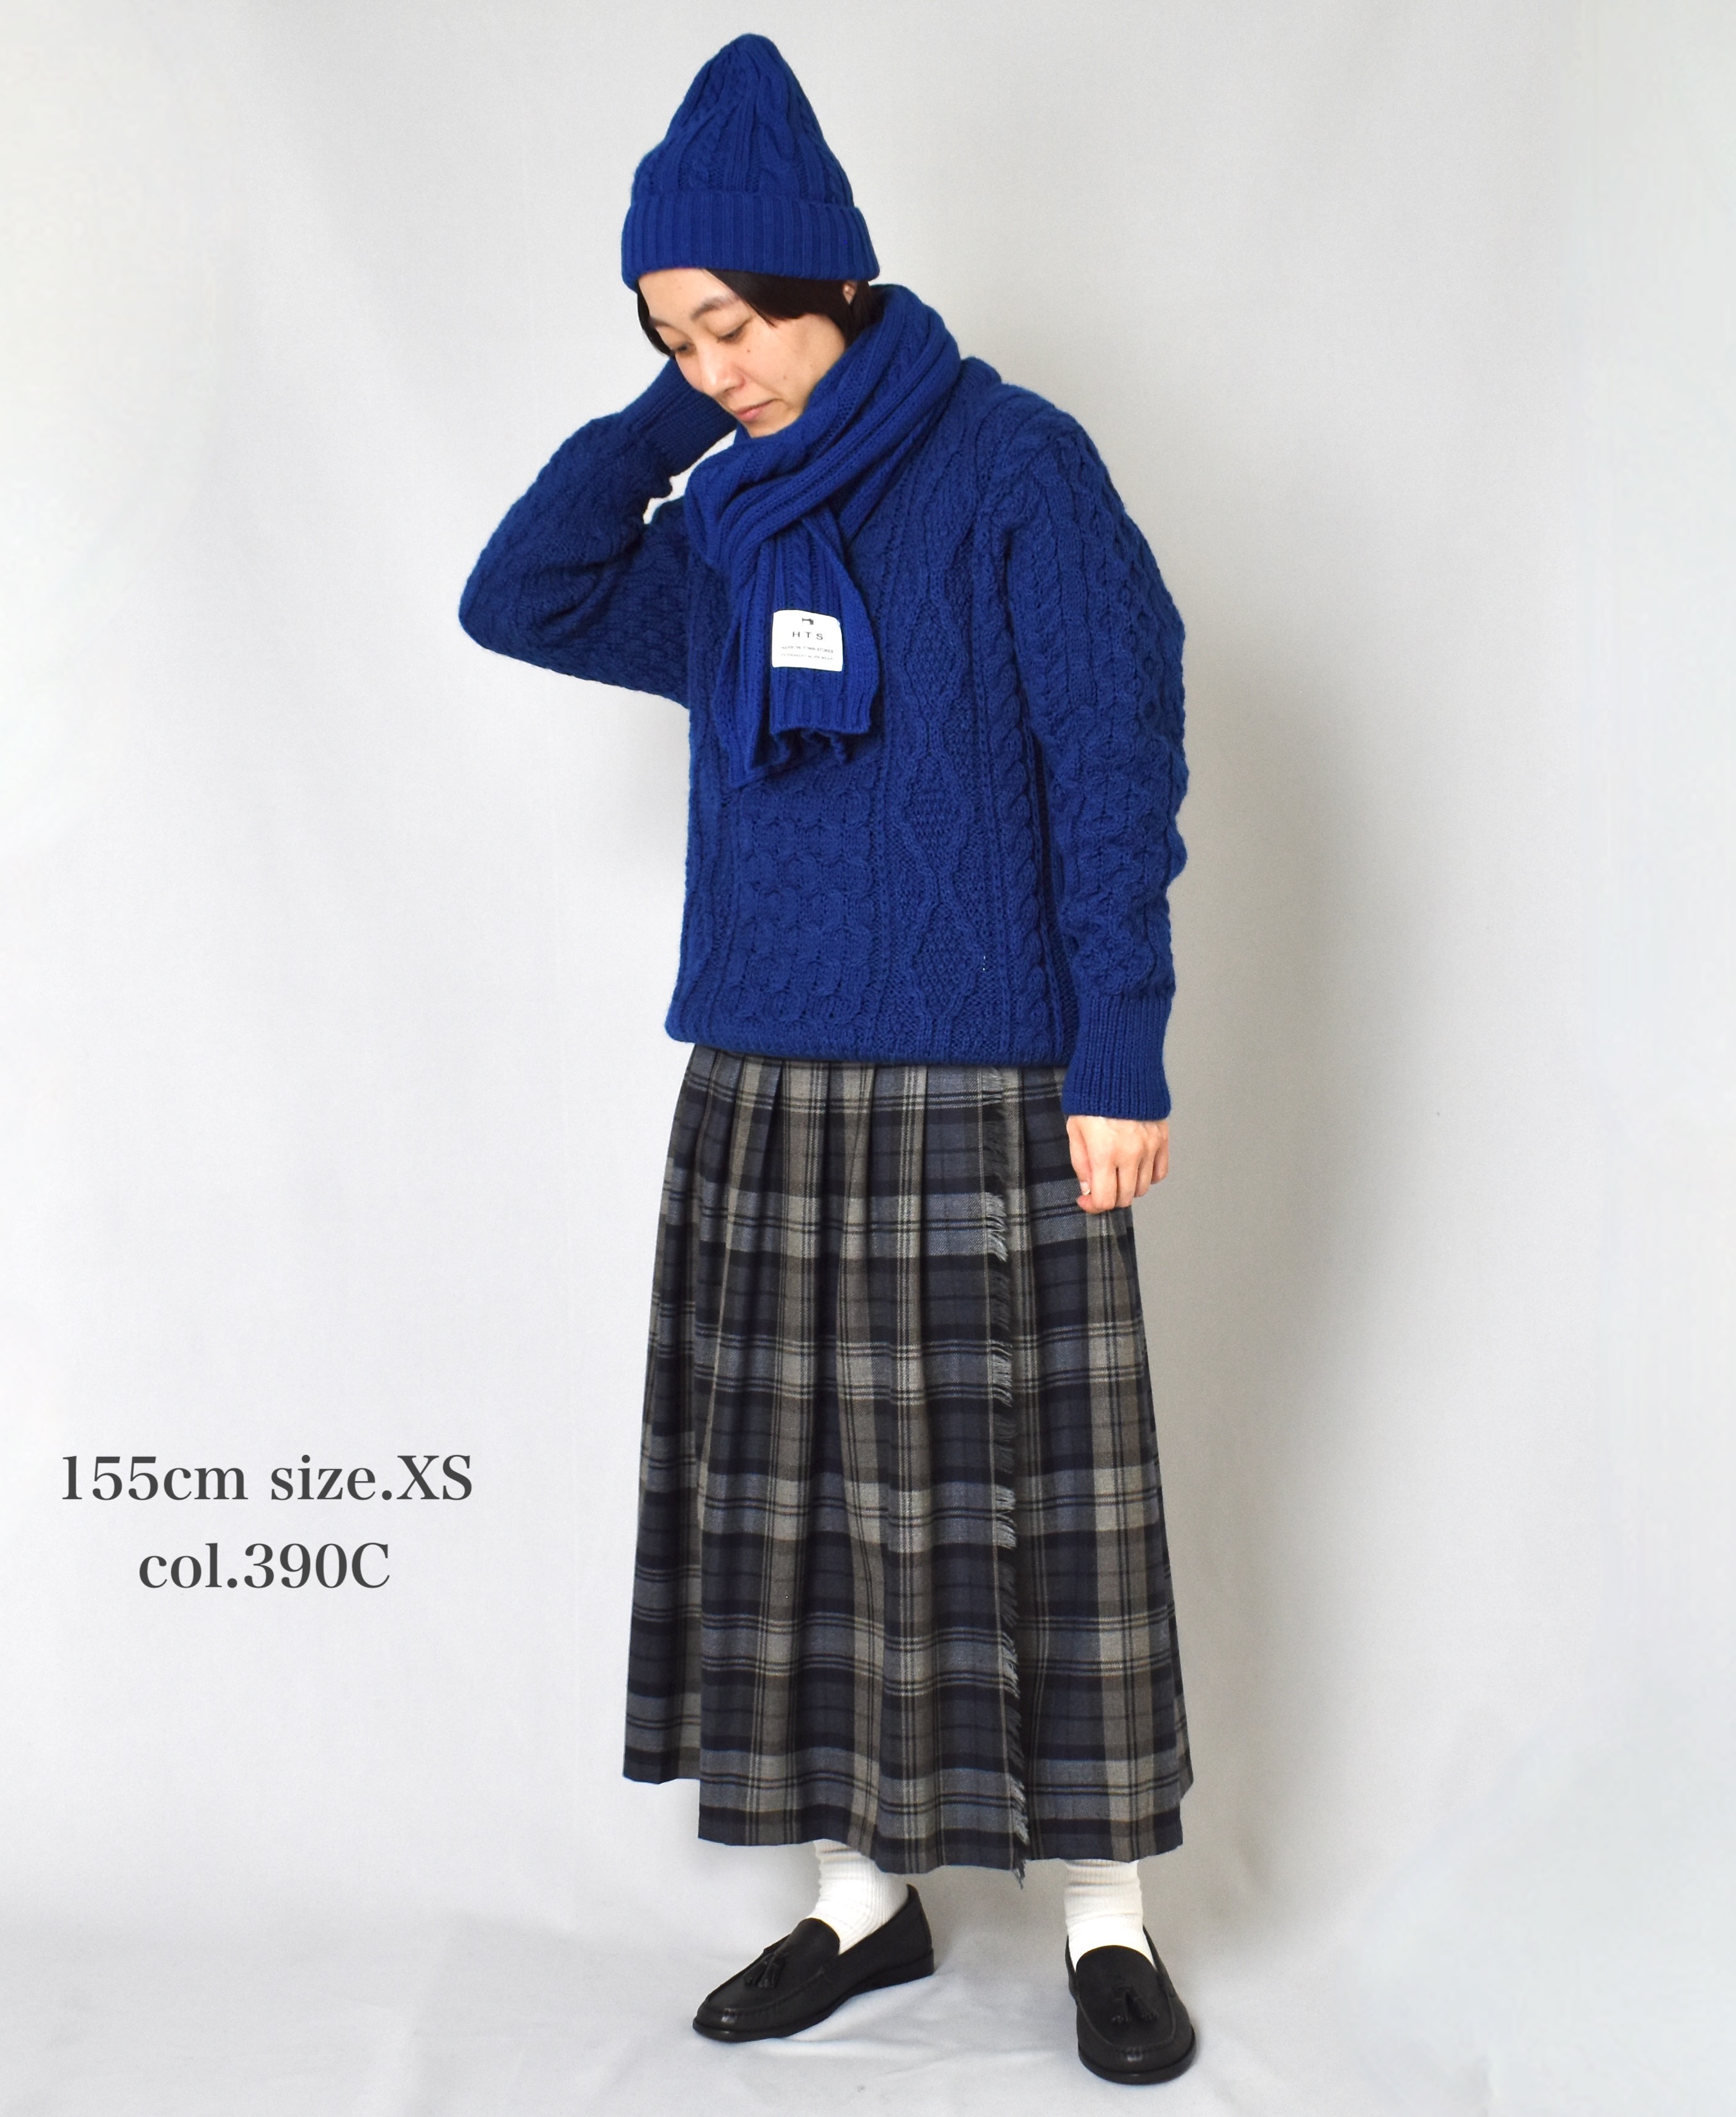 ●NOD0853 (スカート) WORSTED WOOL LOW WAIST PLEATS WRAP SKIRT LENGTH 80cm (WITH PIN)